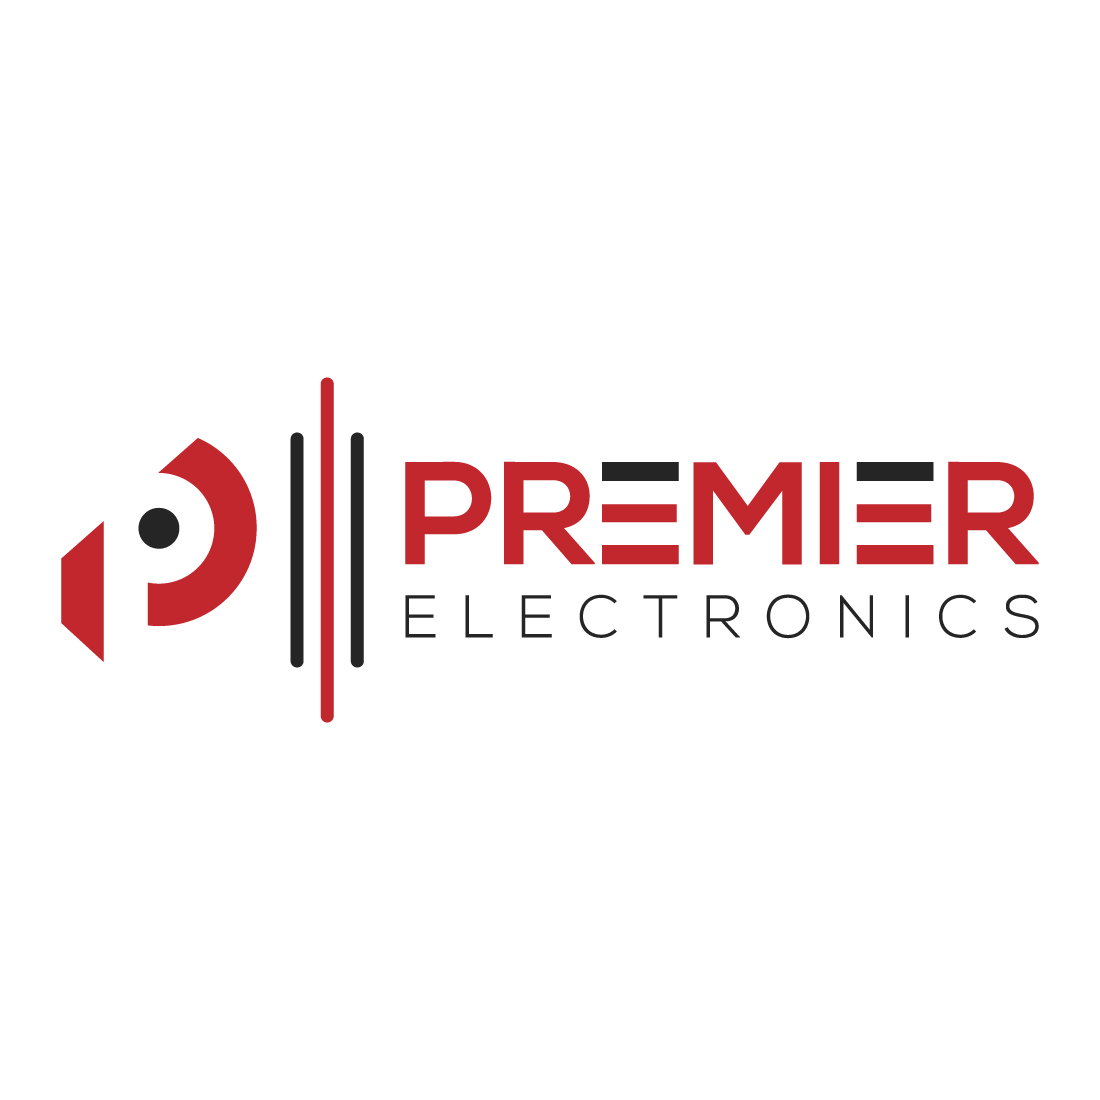 Electronics store logo design template Royalty Free Vector